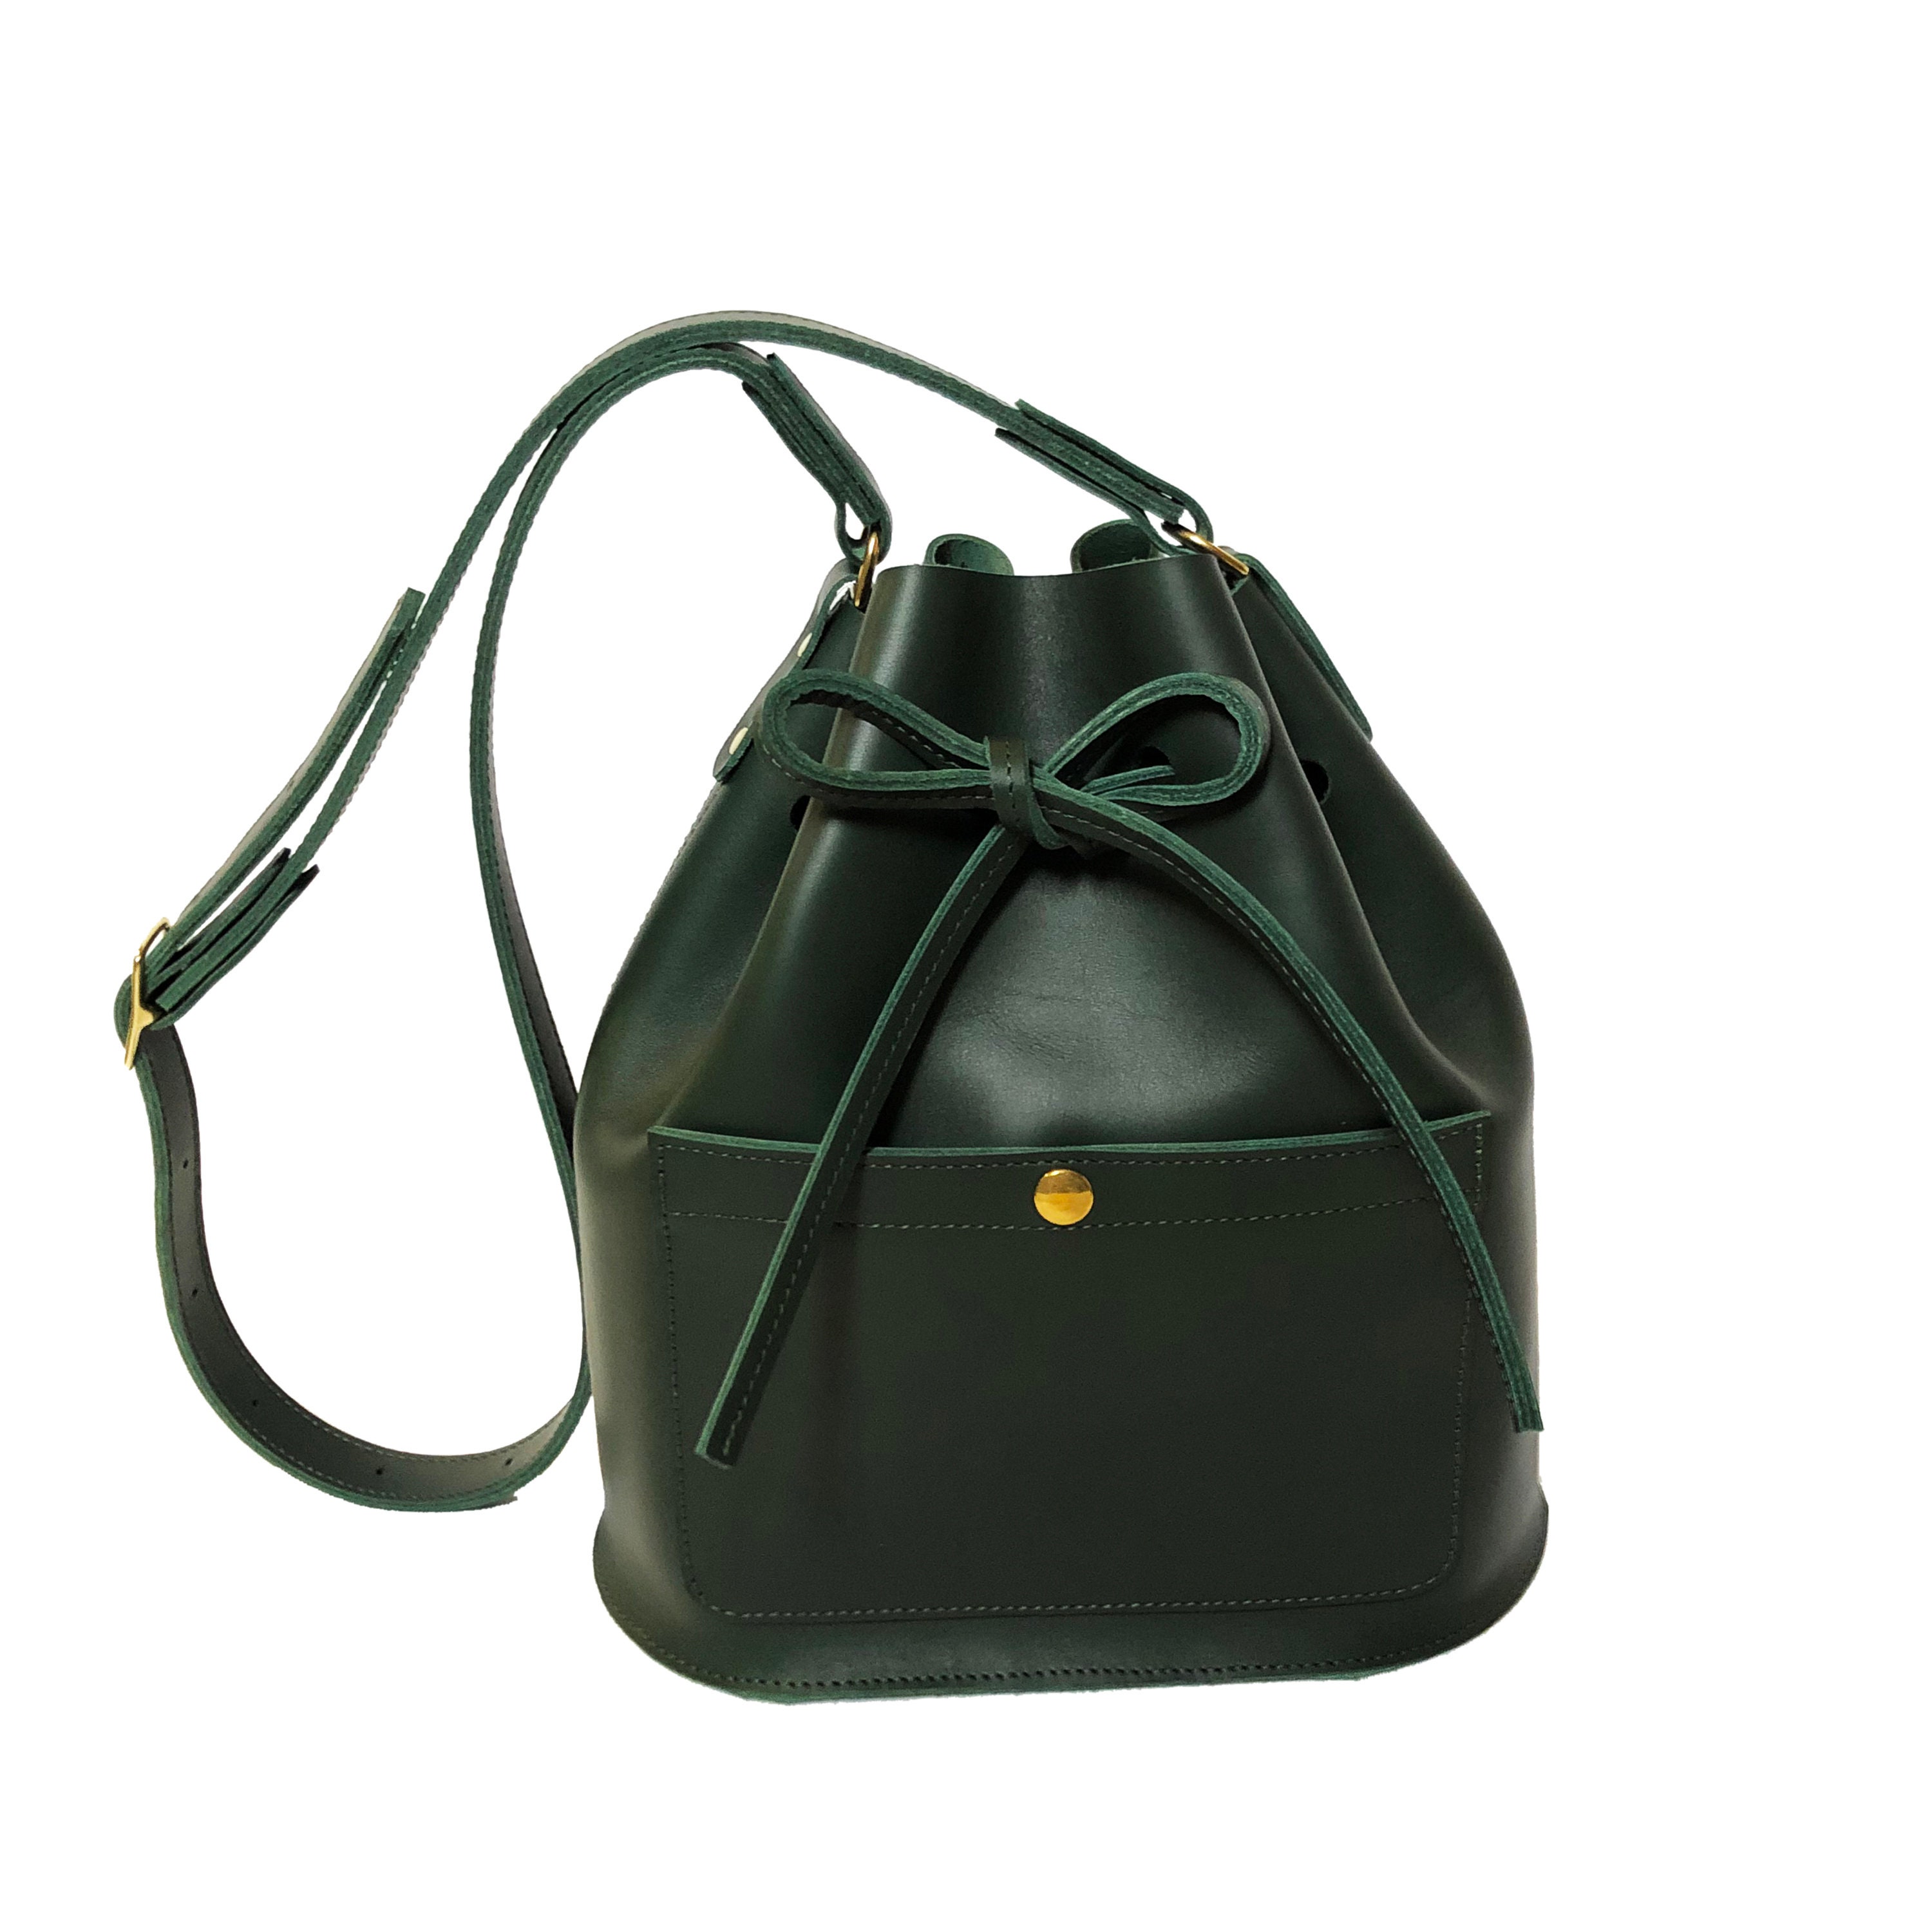 Elizabeth Small Crossbody Bucket Bag - Structured Silhouette, Italian Leather - Black & Black Onyx - Personalized Holiday Gifts, Leatherology